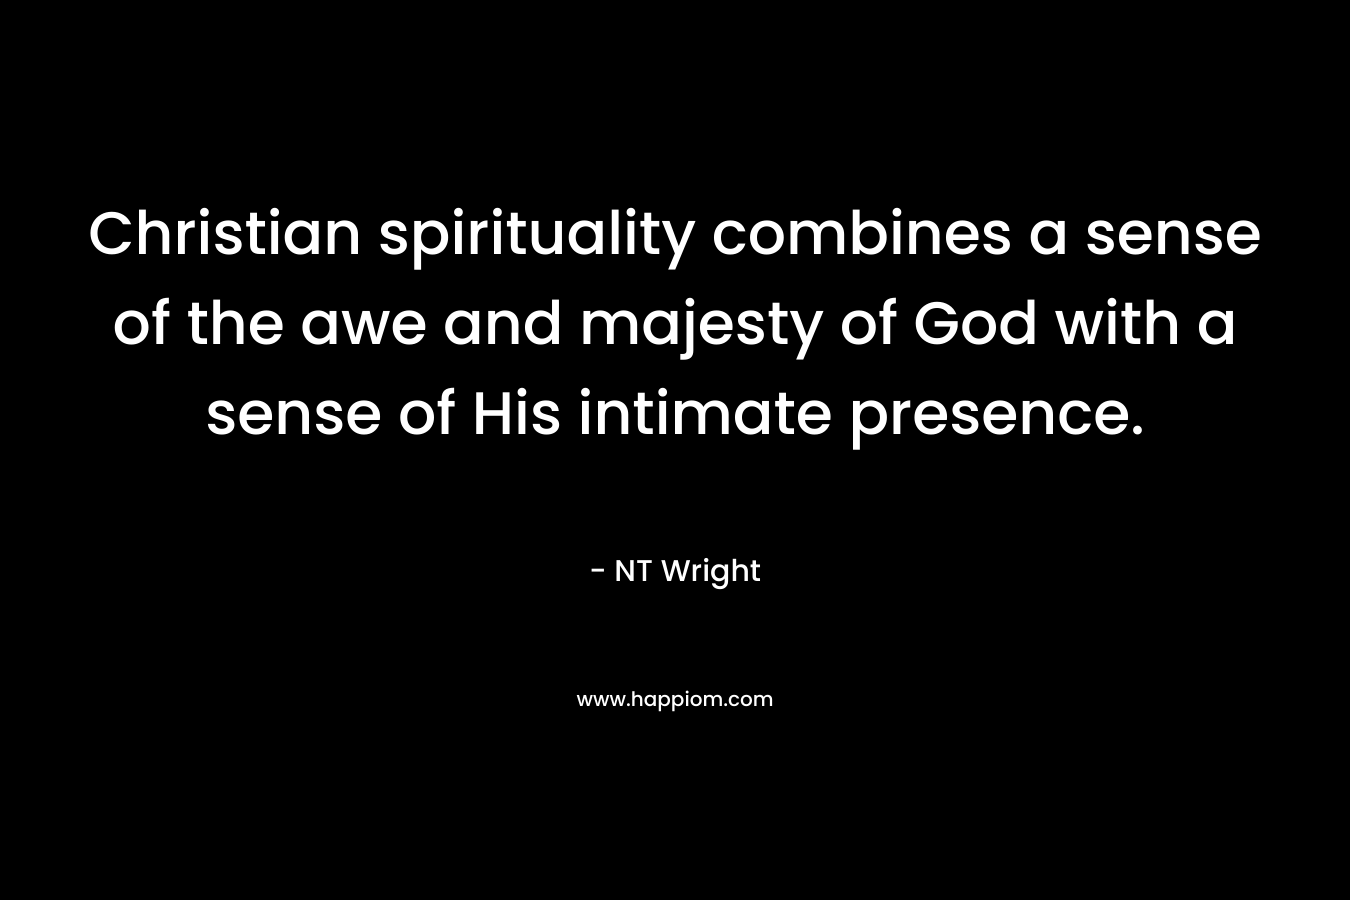 Christian spirituality combines a sense of the awe and majesty of God with a sense of His intimate presence. – NT Wright